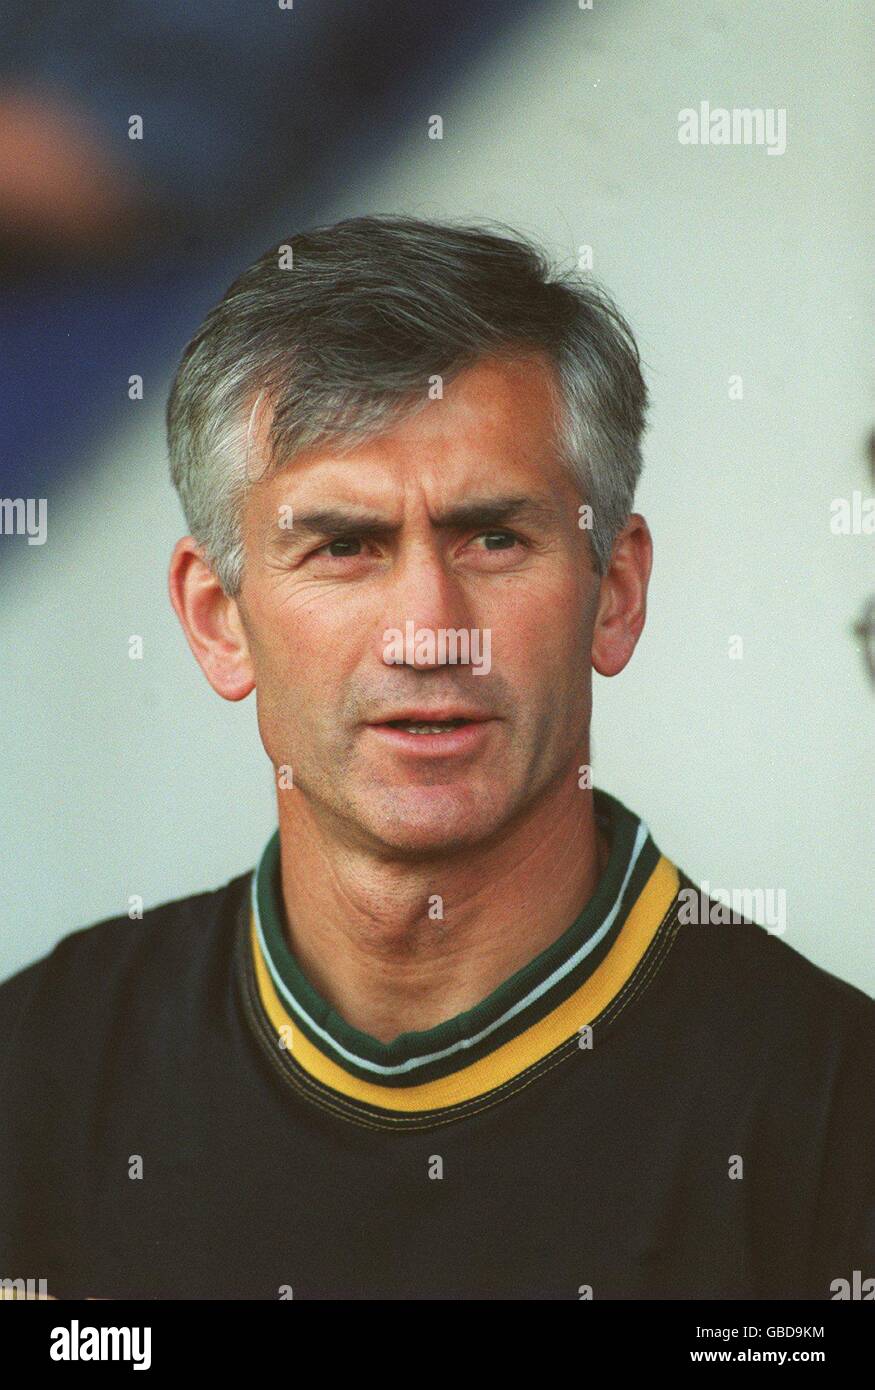 DENNIS MORTIMER, ASSISTANT MANAGER, WEST BROMWICH ALBION **** WBA Stockfoto